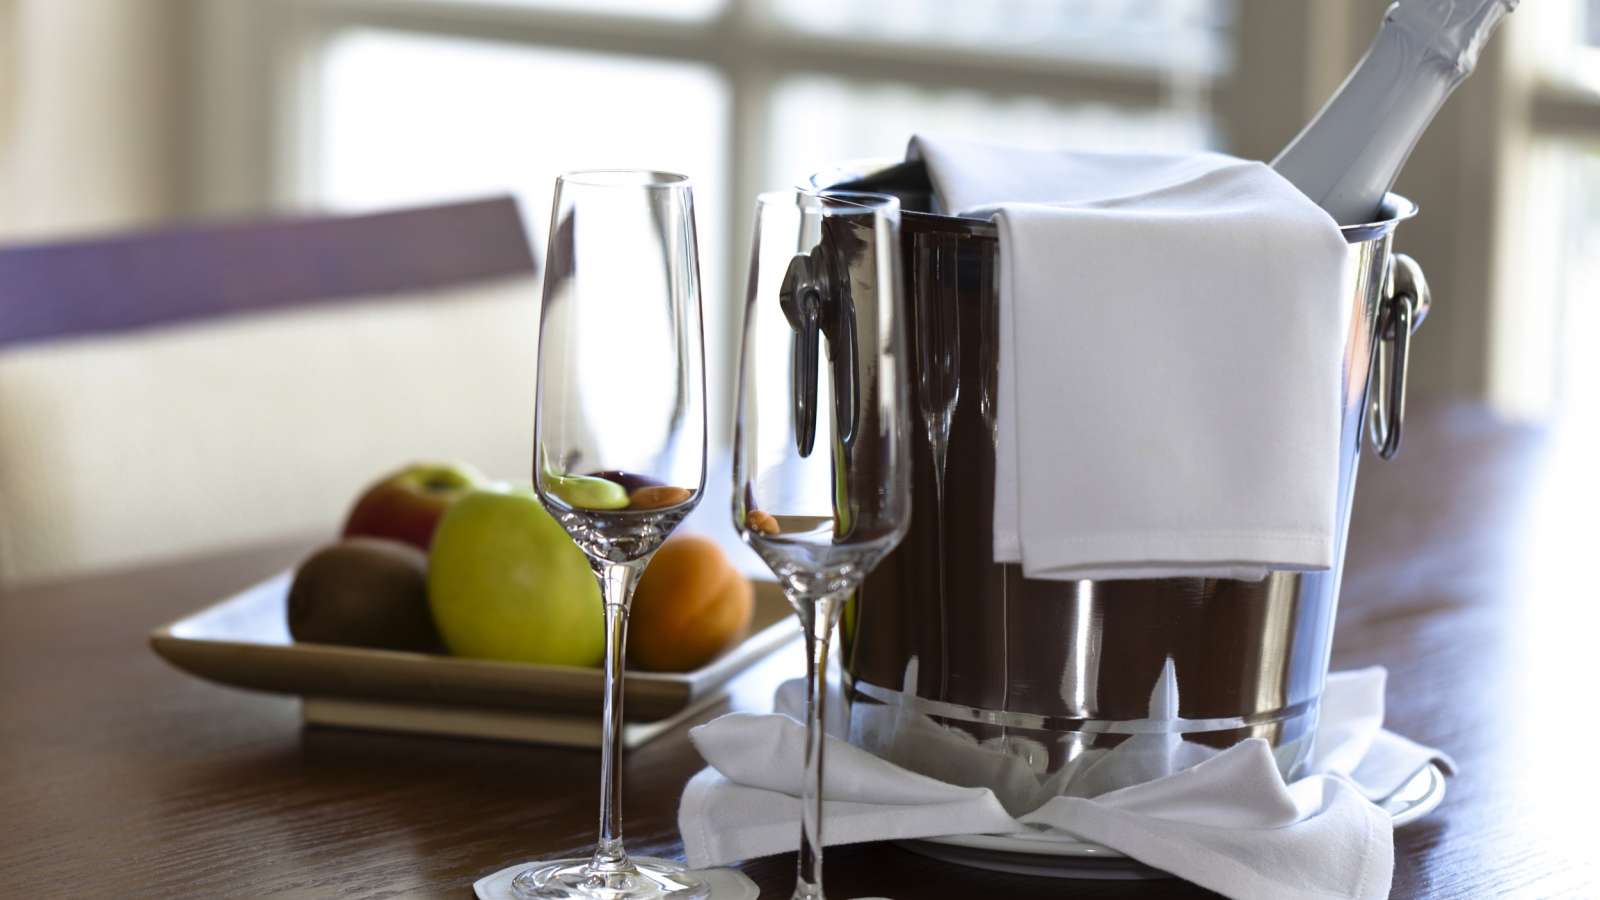 Book the Centro Hotel Celebration Package, including sparkling wine and a fruit basket!